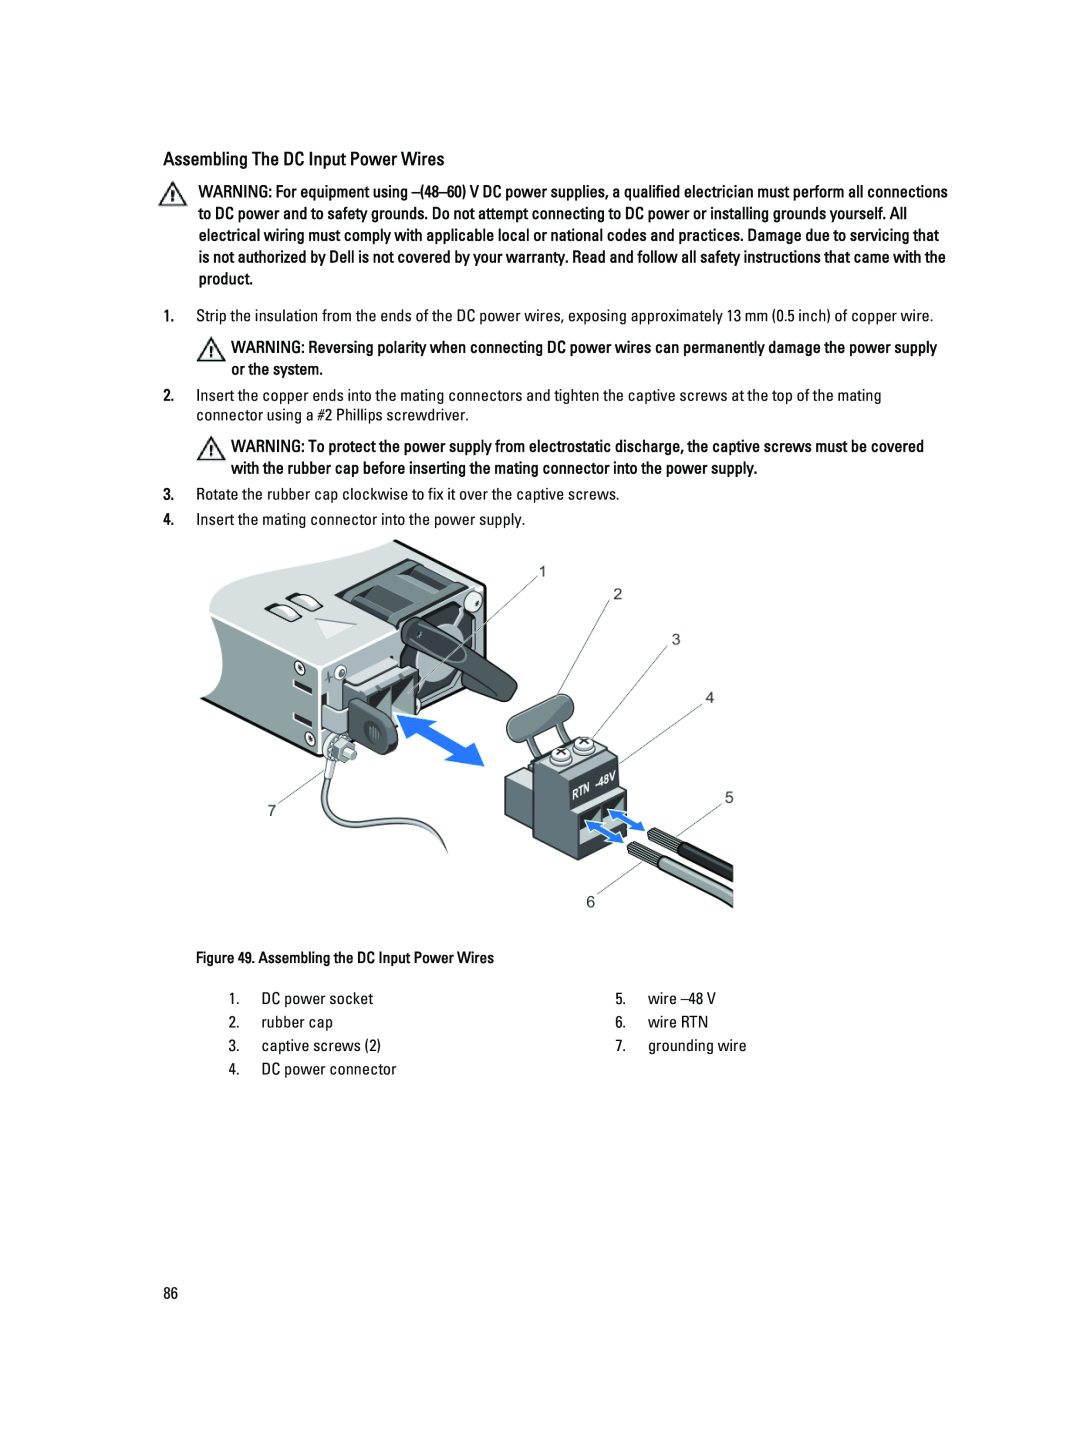 Dell R820 owner manual Assembling The DC Input Power Wires 